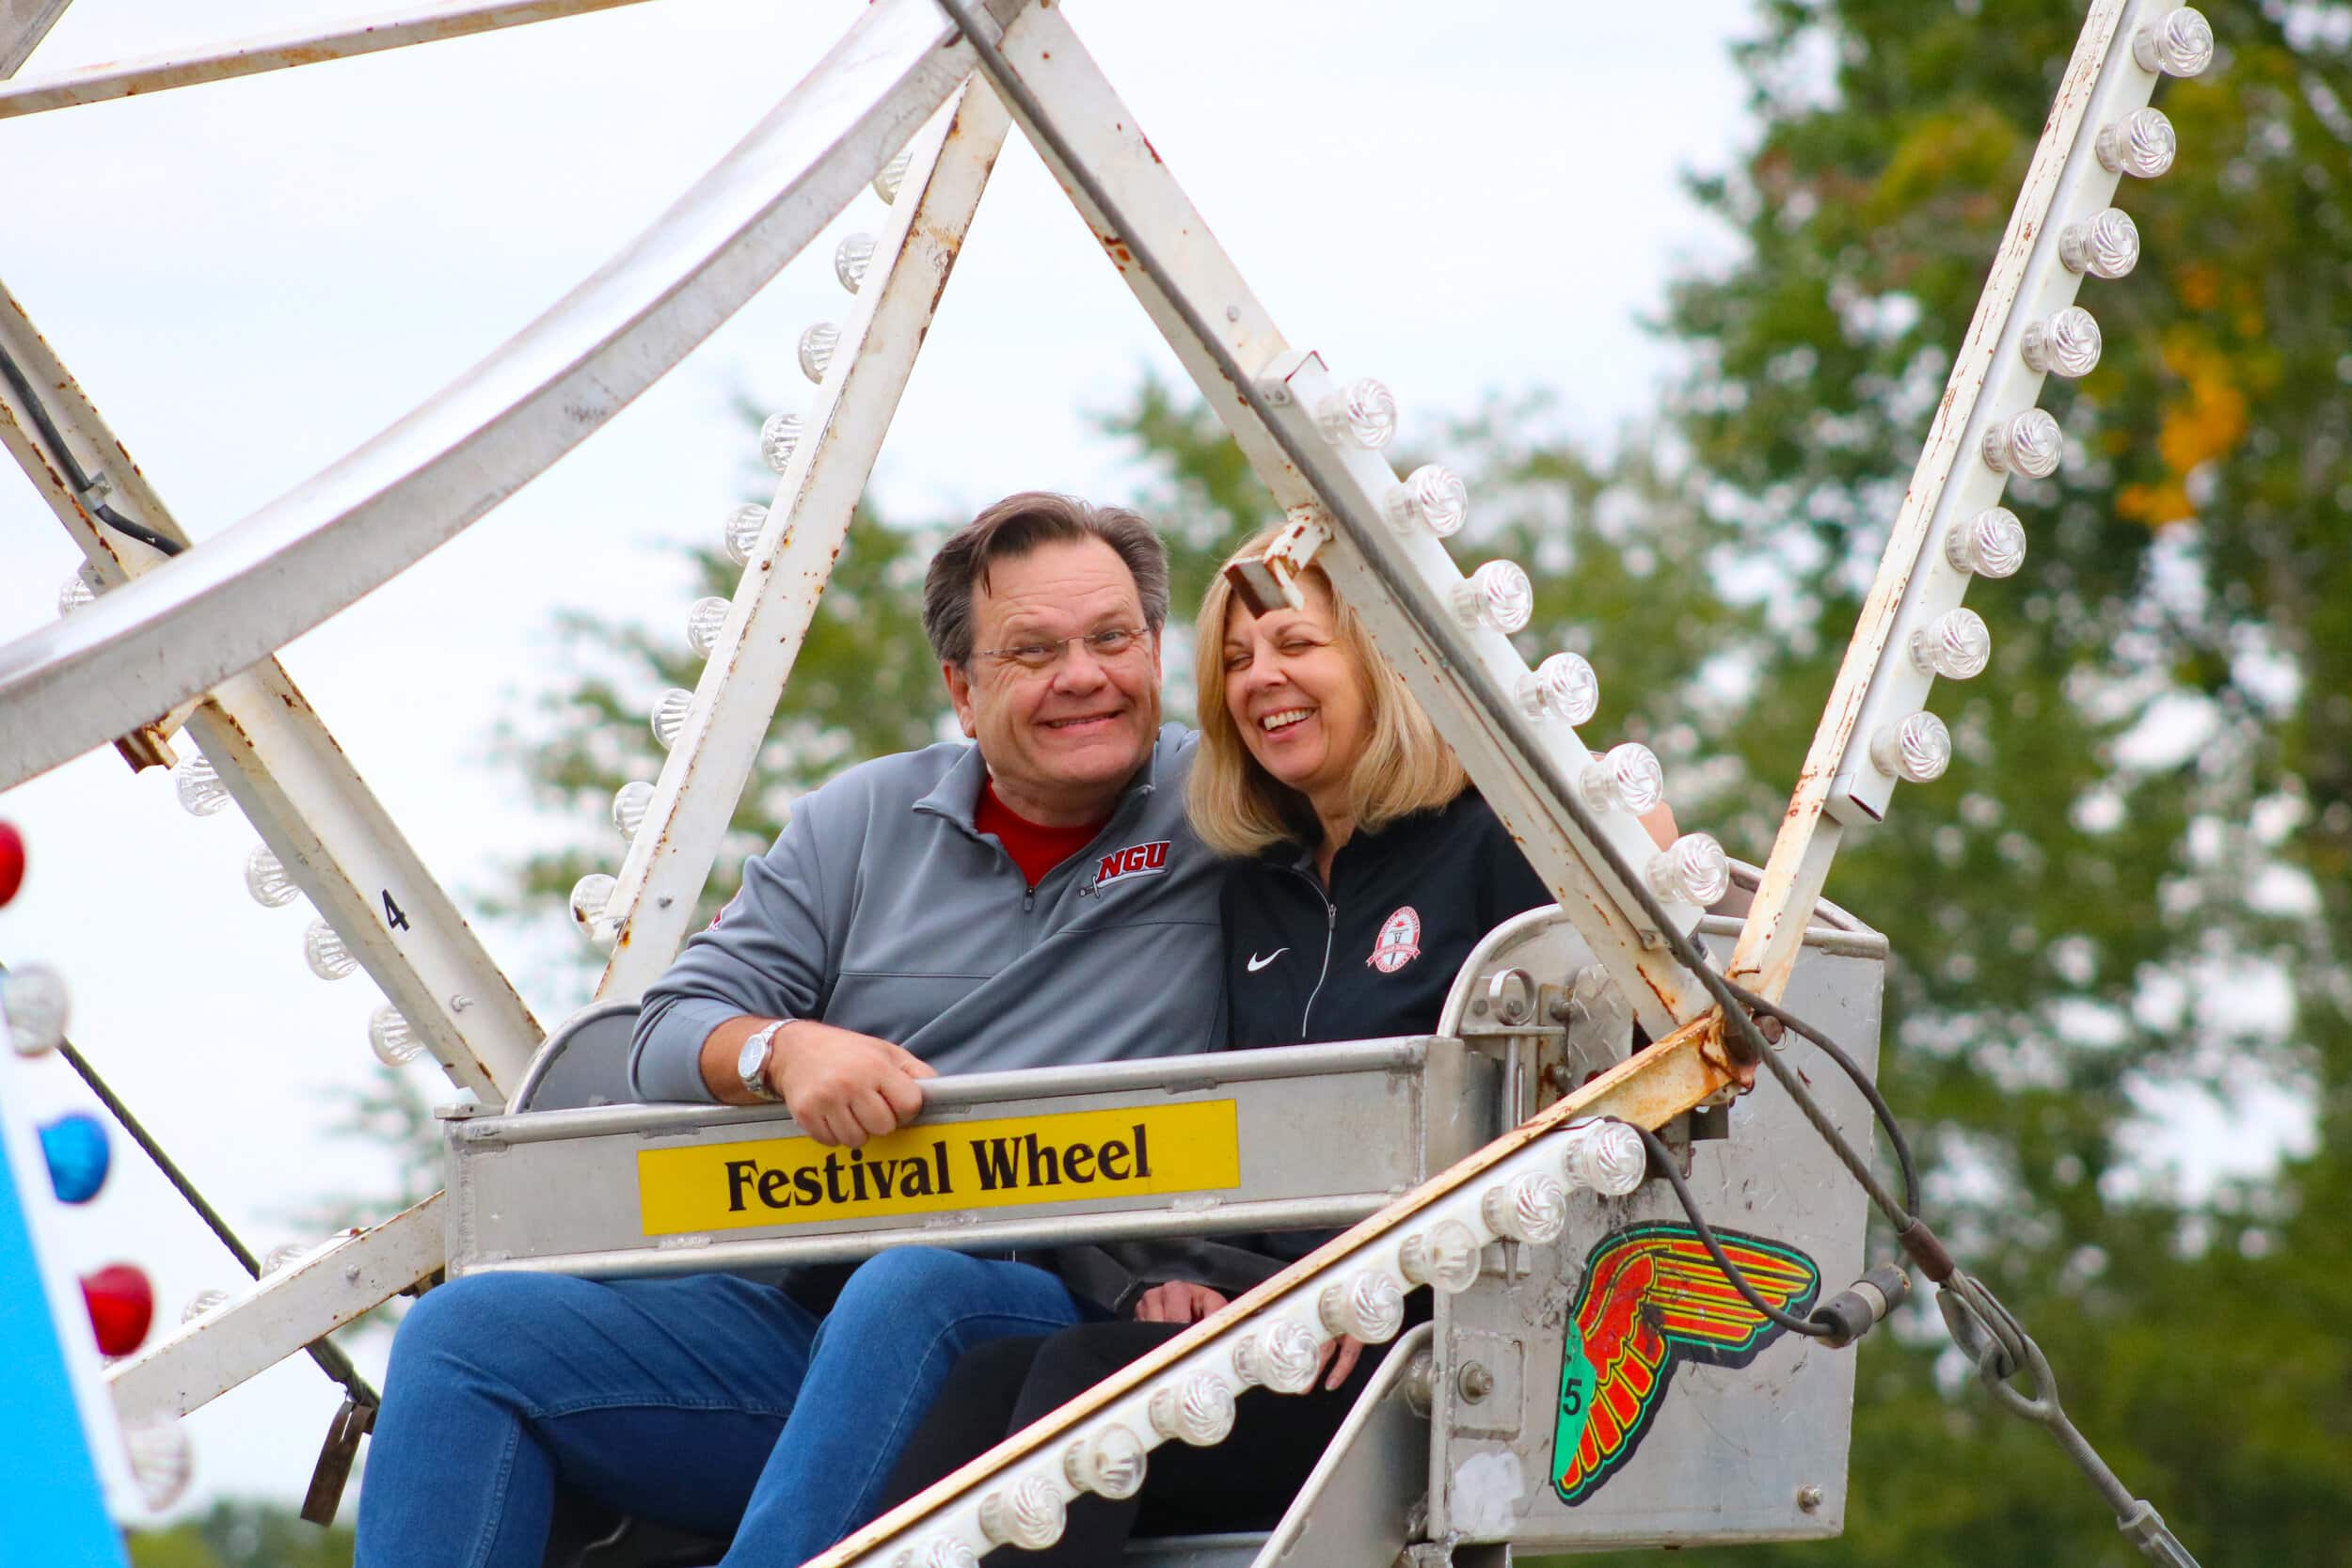 Dr. and Mrs. Fant are part of the first group of people to enjoy the Ferris wheel.